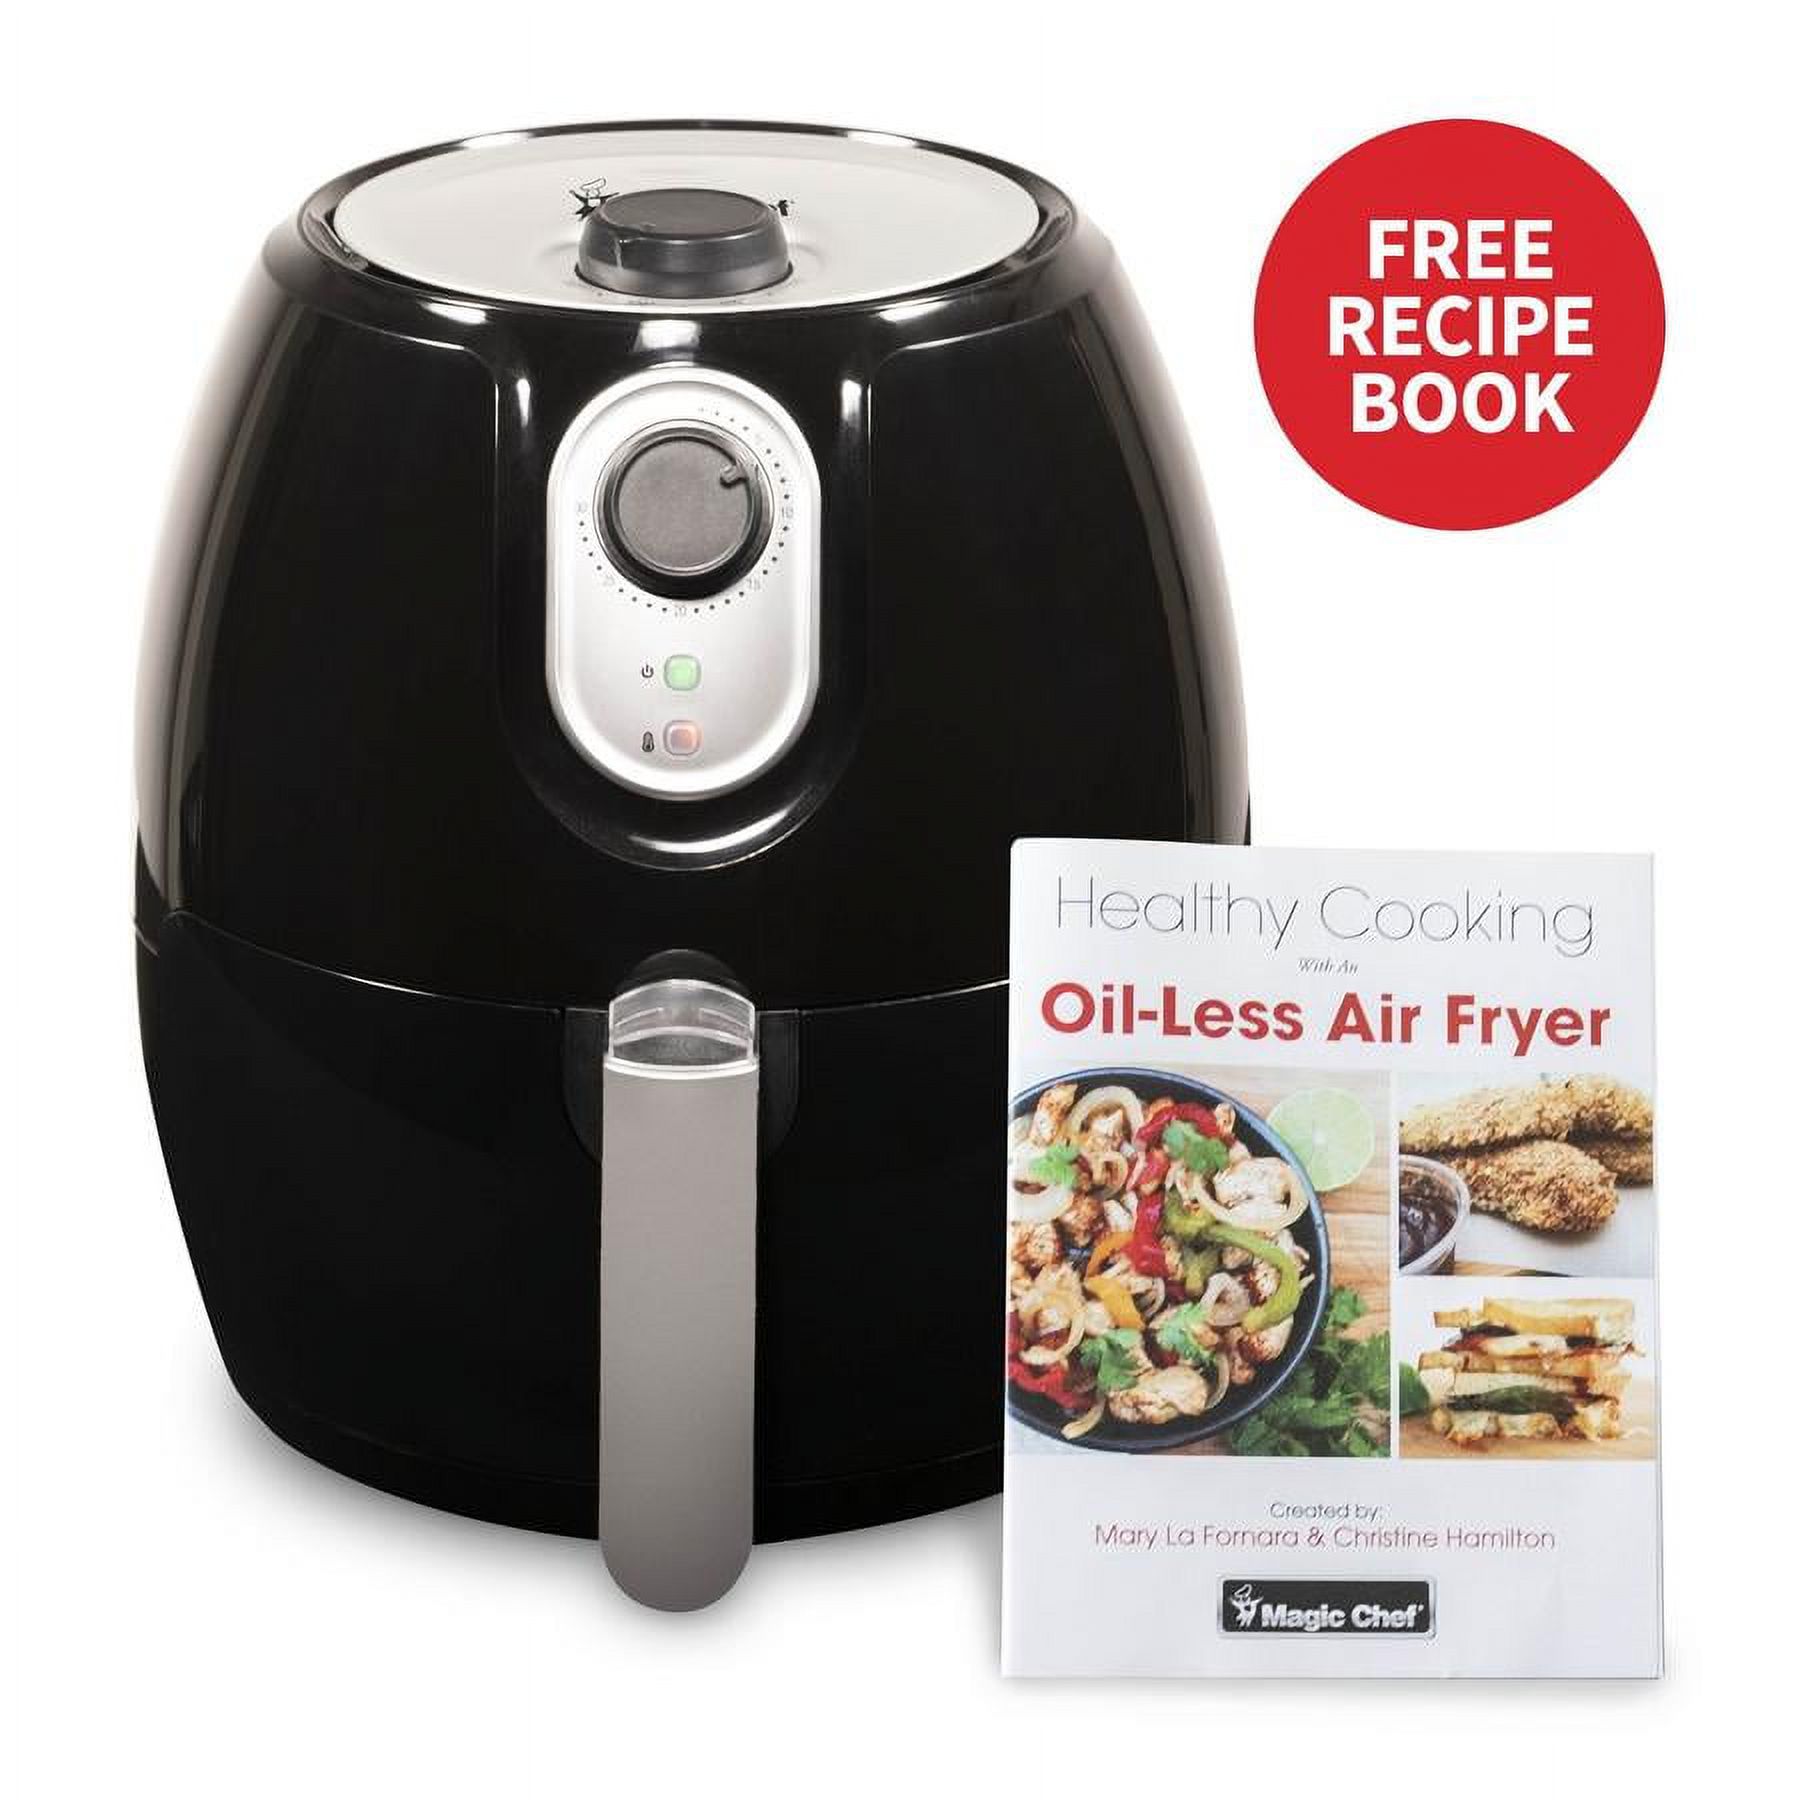 Magic Chef Air Fryer, For Healthy Fried Cooker Food, 2.6 Quart Capacity with Airfryer Cook Book, MCAF26MB - image 1 of 6